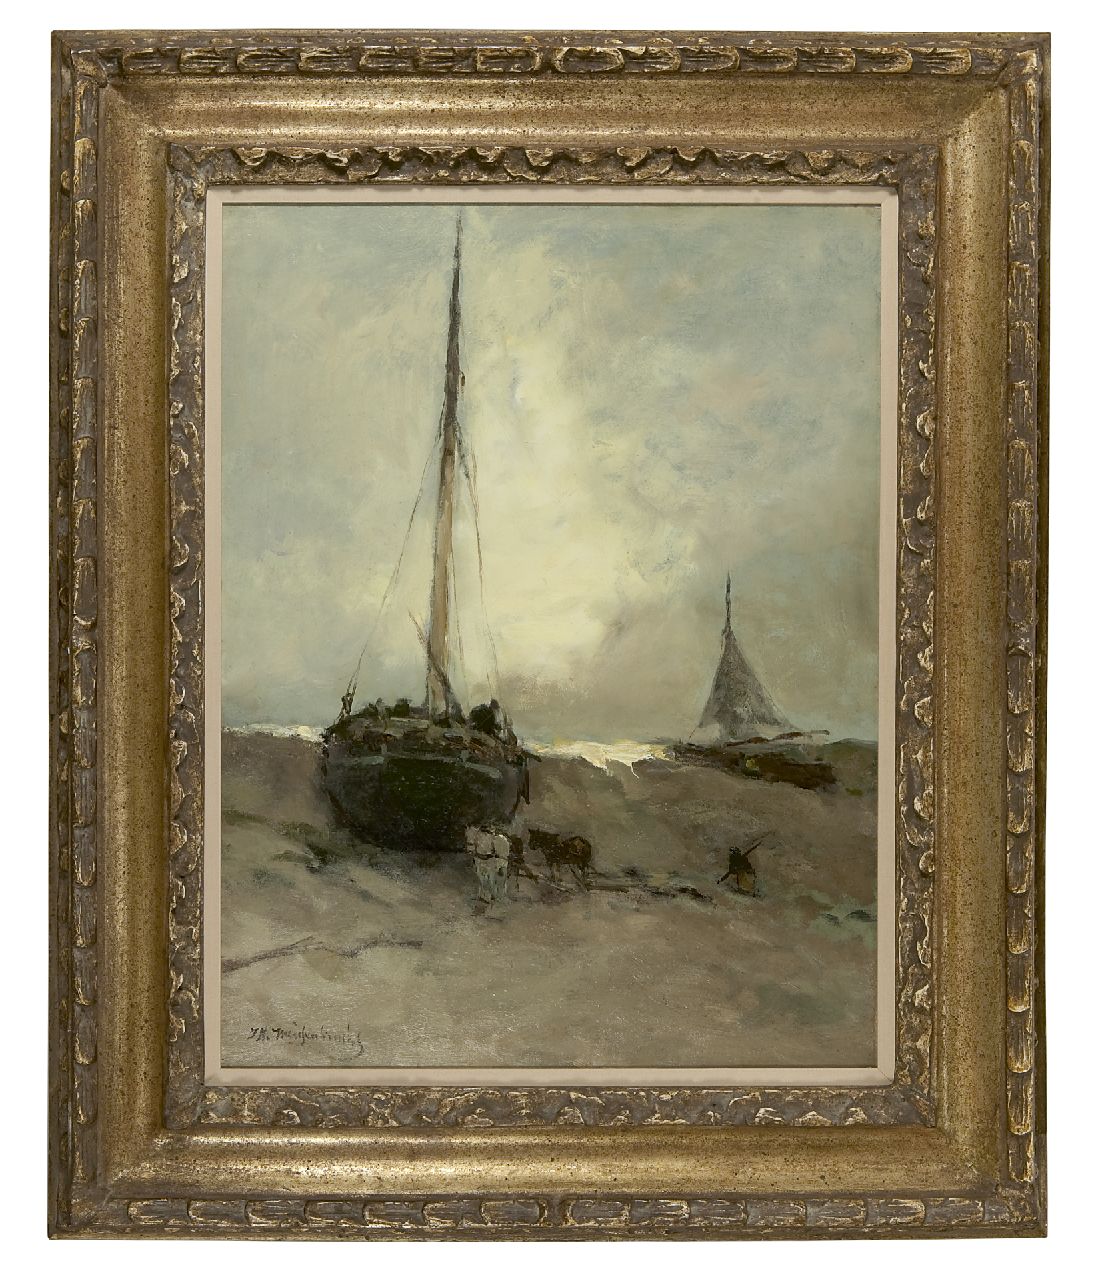 Weissenbruch H.J.  | Hendrik Johannes 'J.H.' Weissenbruch, Fishing boats on the beach, oil on canvas 56.0 x 43.0 cm, signed l.l.